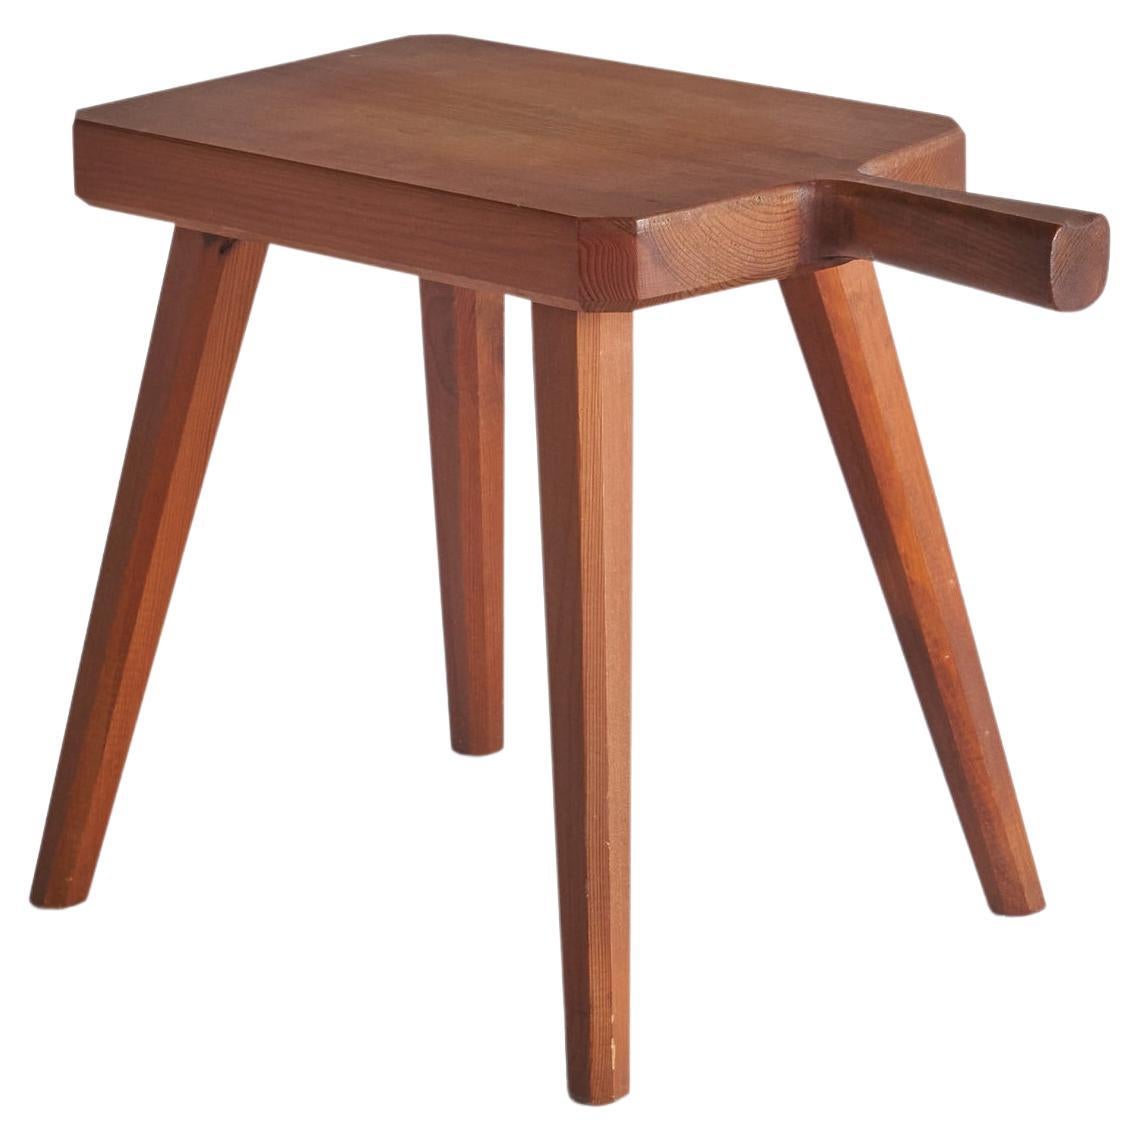 Swedish Designer, Stool, Stained Solid Pine, Sweden, 1970s